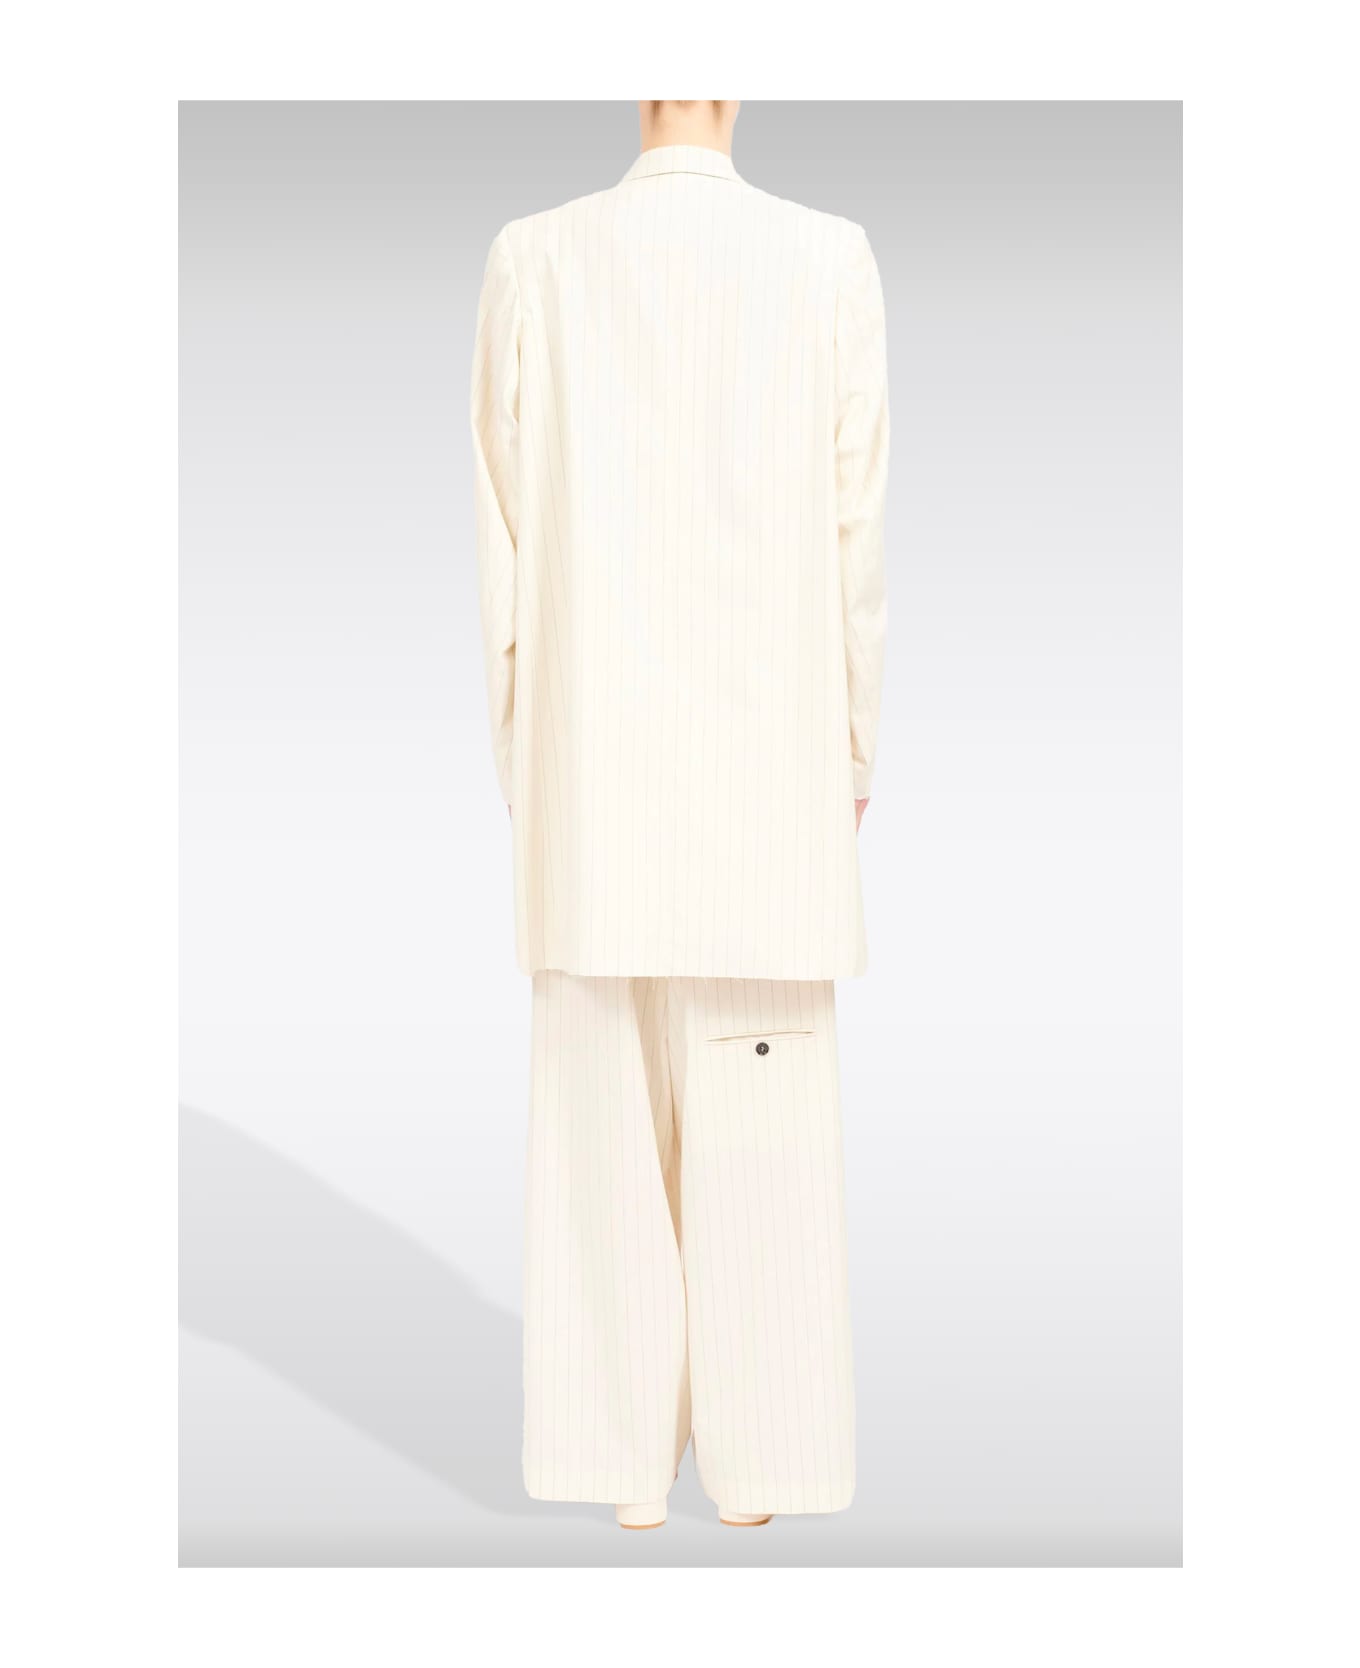 MM6 Maison Margiela Giacca Off white pinstriped long double-breated blazer - Panna コート